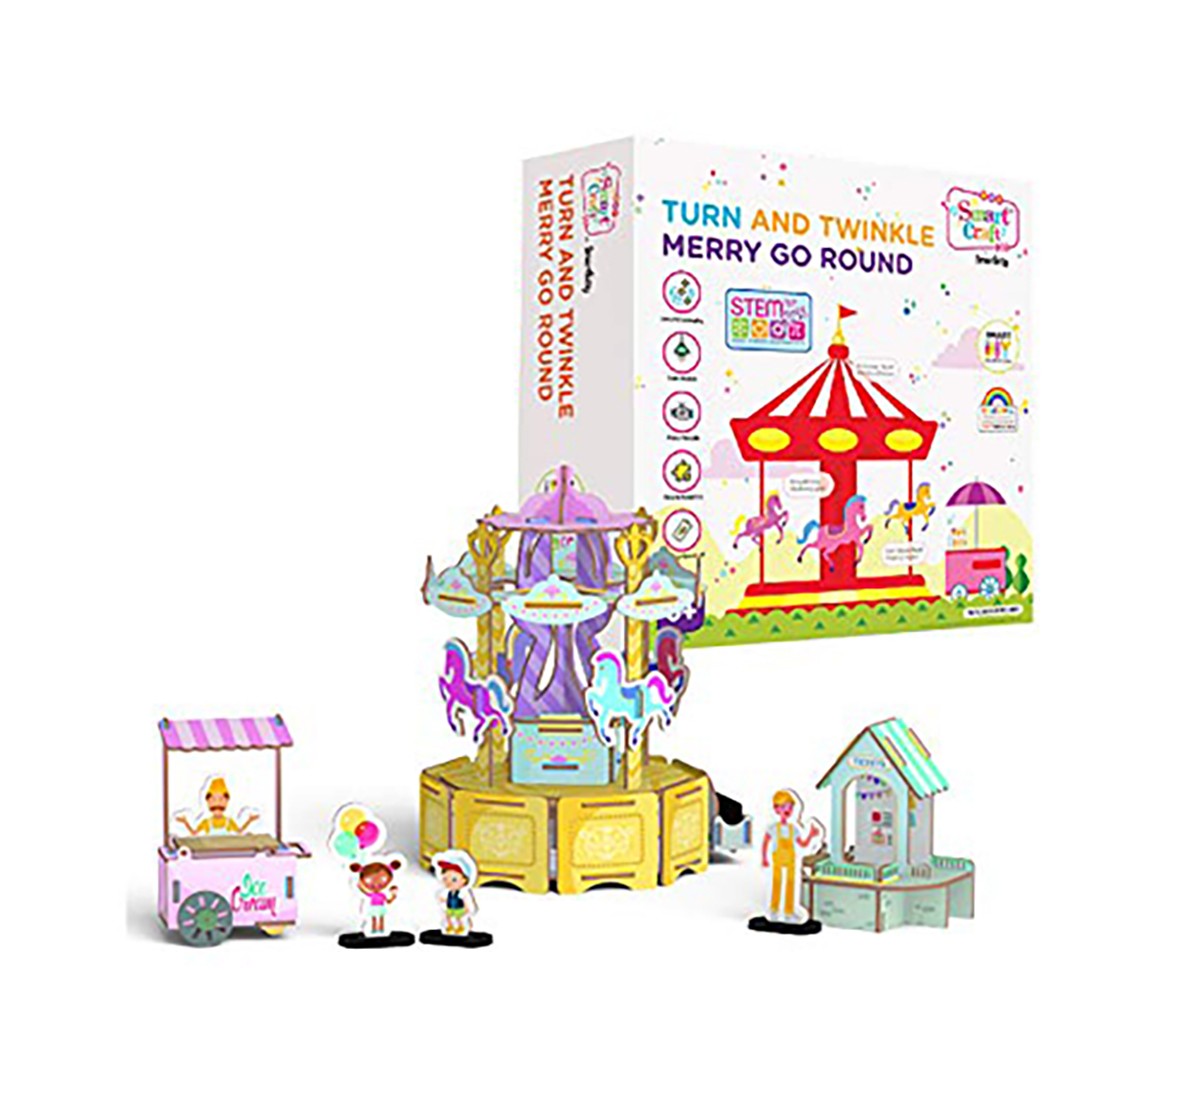 Smartivity Turn And Twinkle Merry Go Round: Stem, Diy, Educational, Learning, Building and Construction Toy for Kids age 6Y+ 